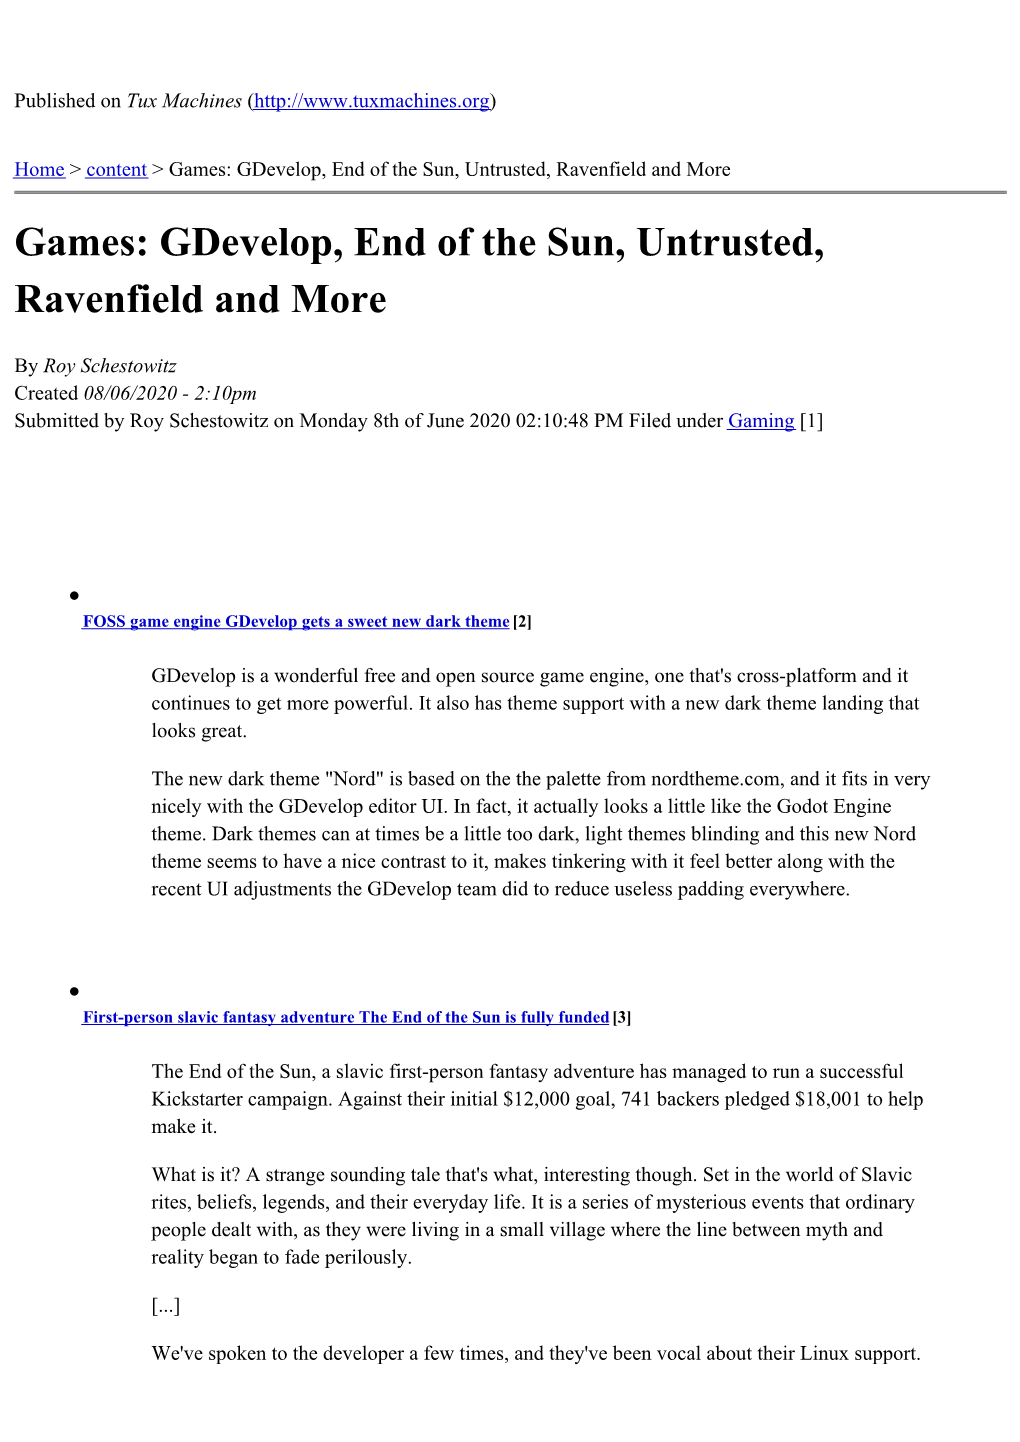 Games: Gdevelop, End of the Sun, Untrusted, Ravenfield and More